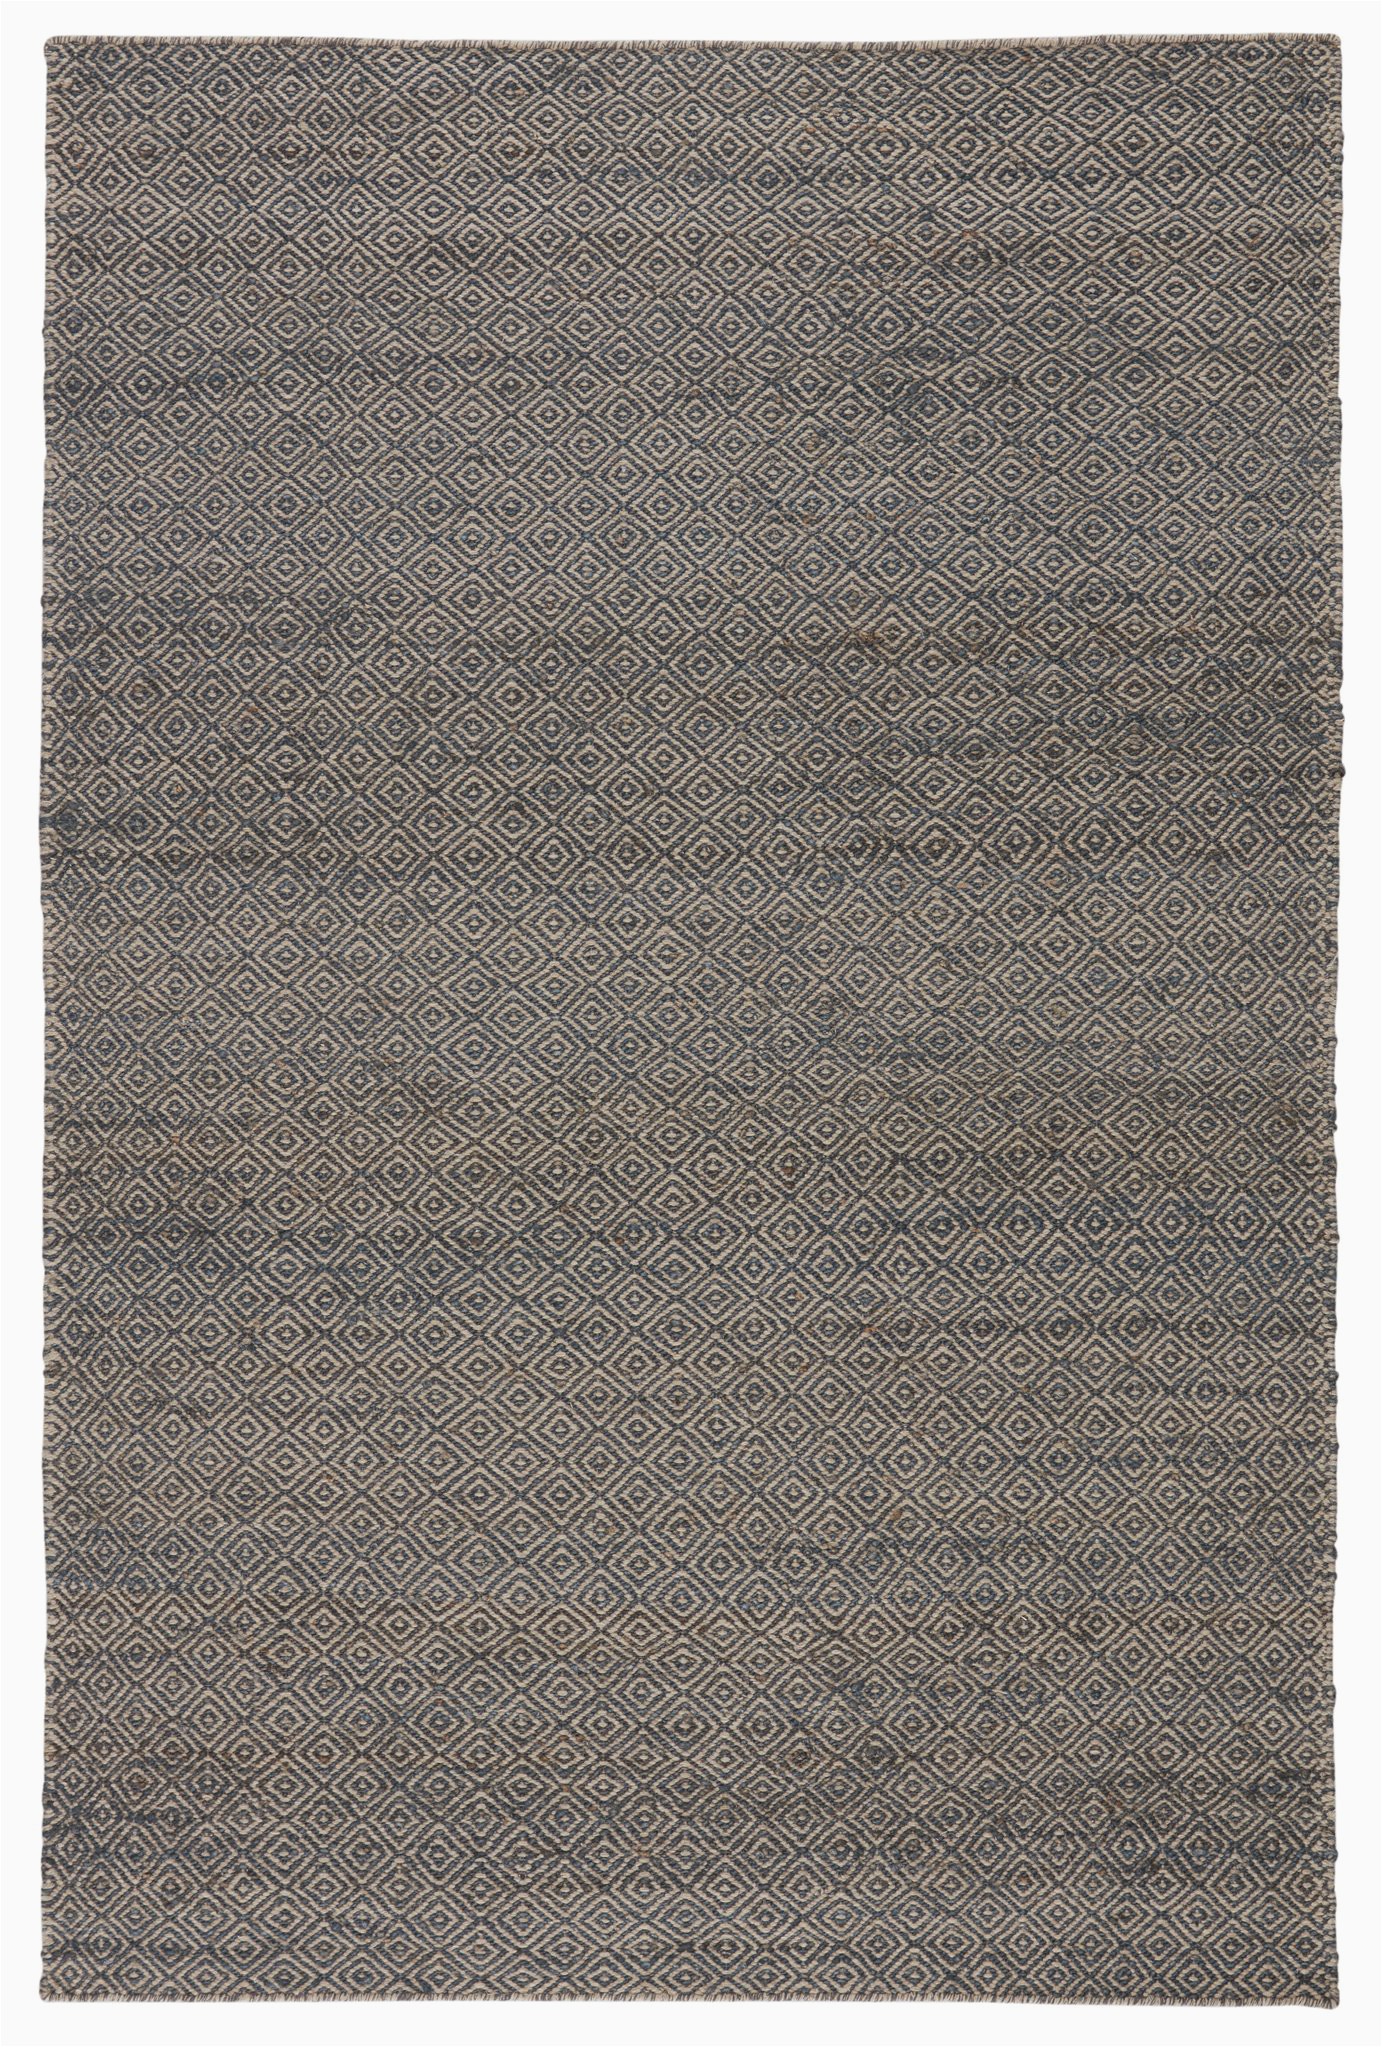 Gray Brown and White area Rug Wales Natural Geometric Gray & White area Rug – Burke Decor